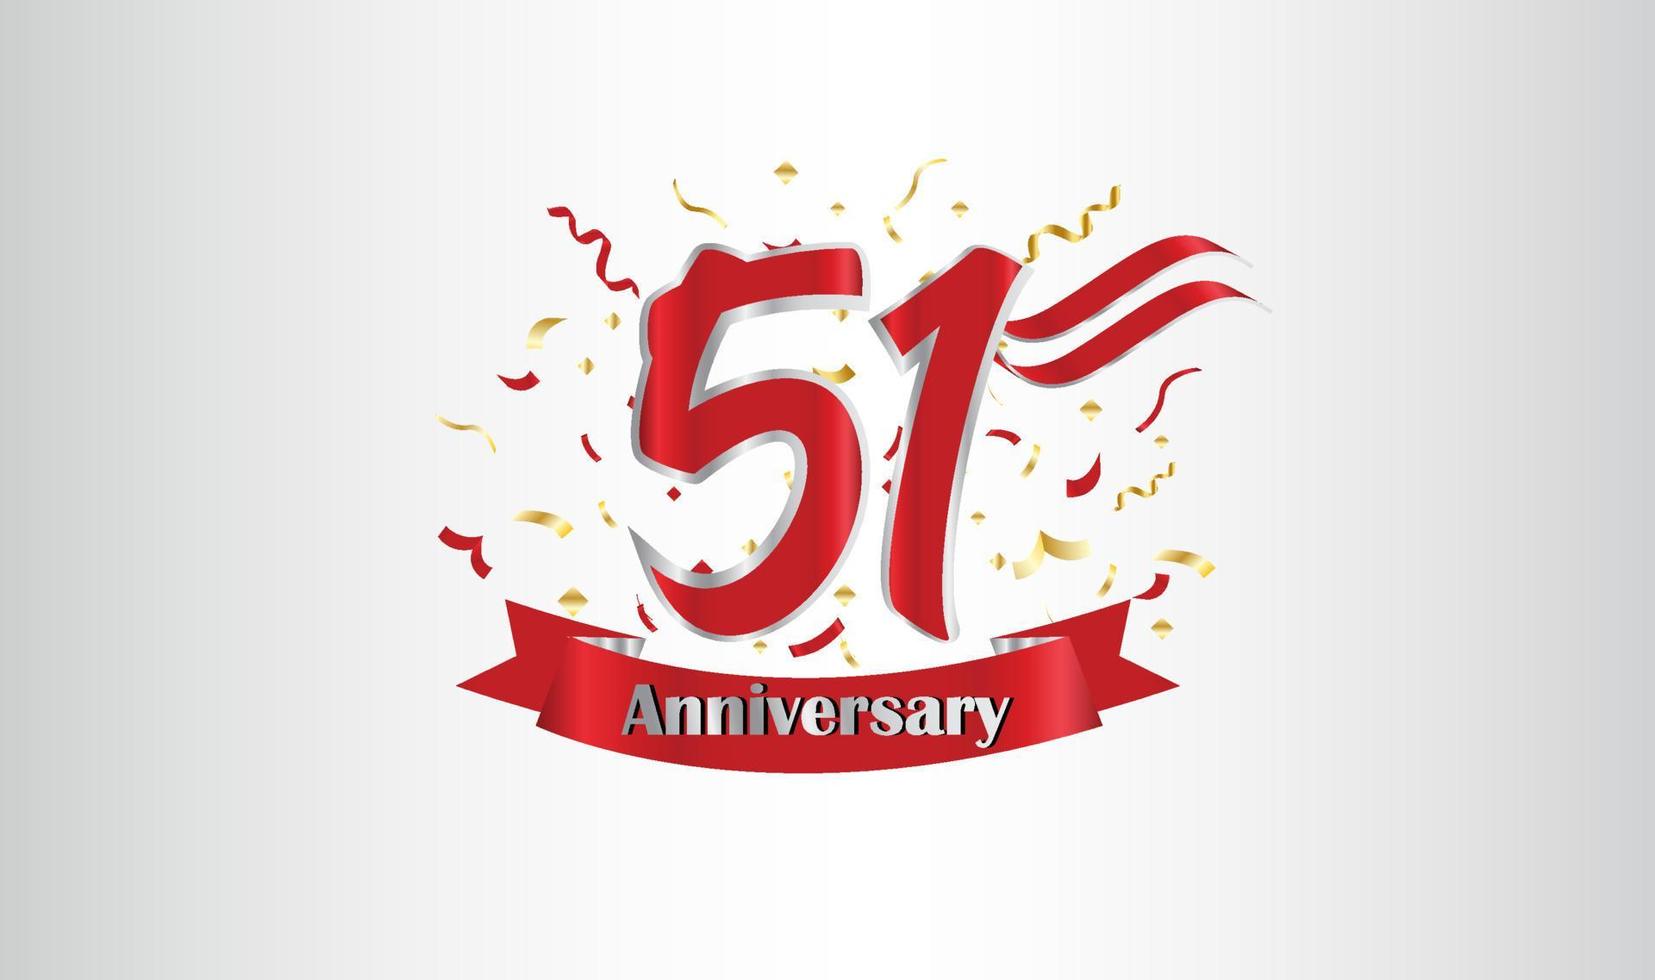 Anniversary celebration background. with the 51st number in gold and with the words golden anniversary celebration. vector